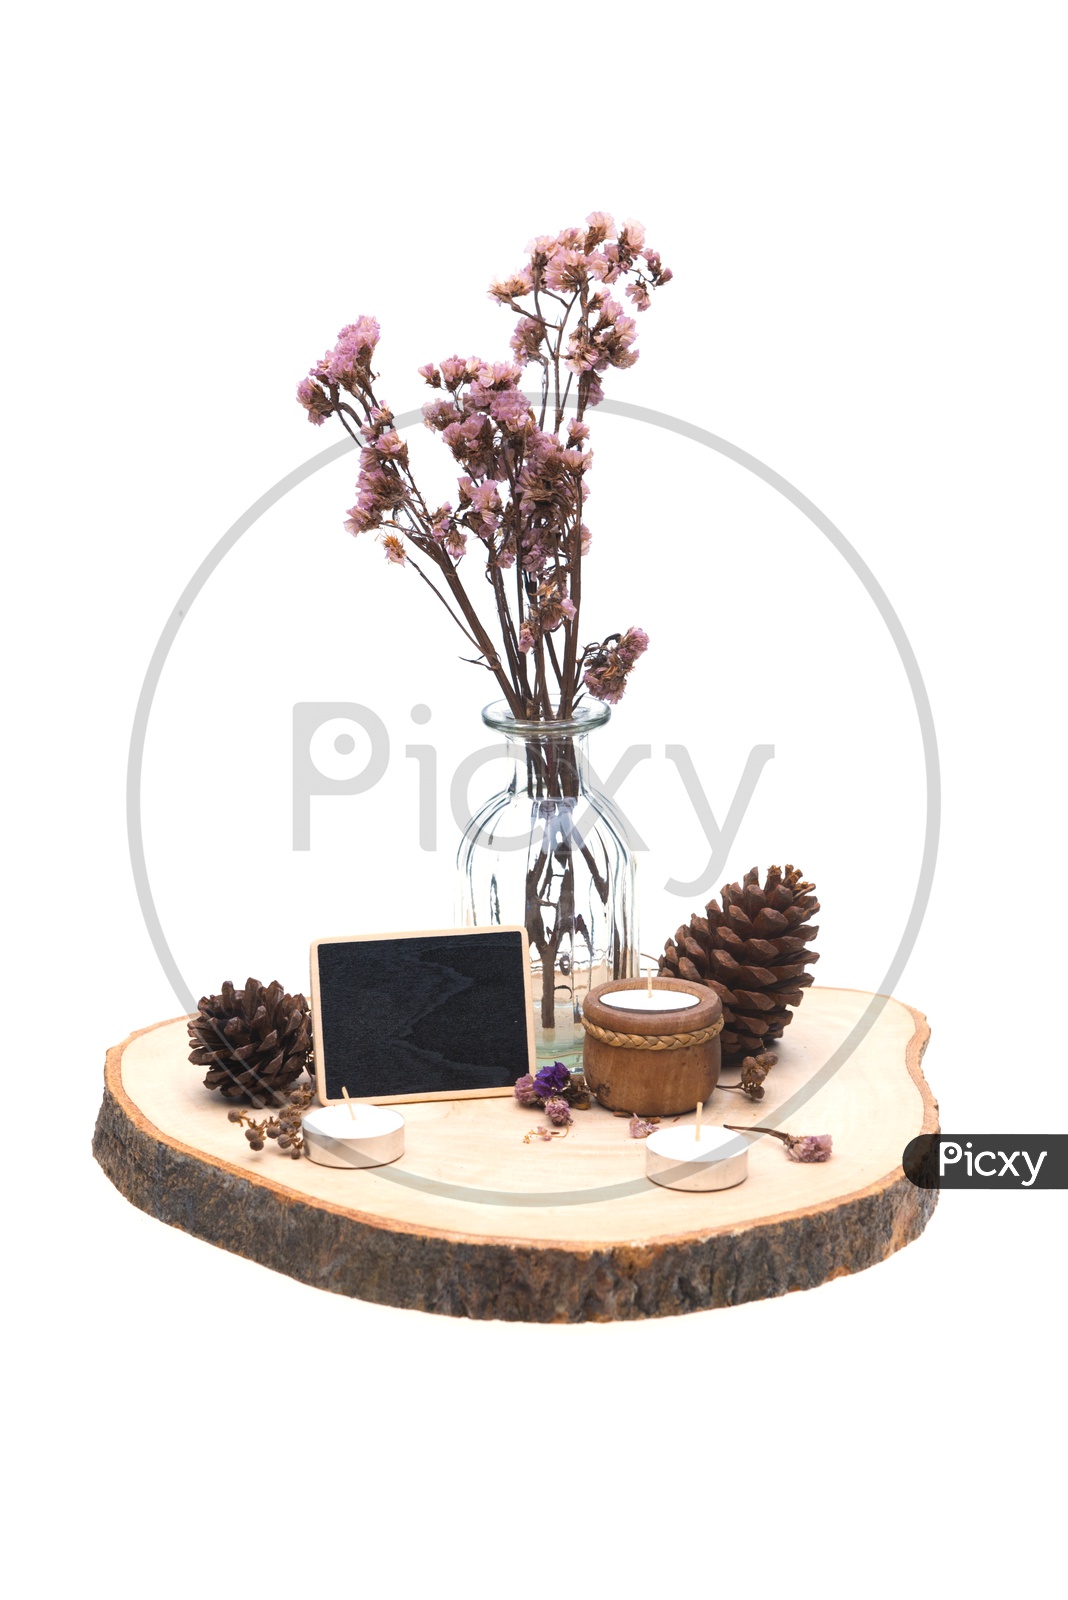 Artistic Background with Dried Vintage Pine Flowers on Wood  isolated on white background